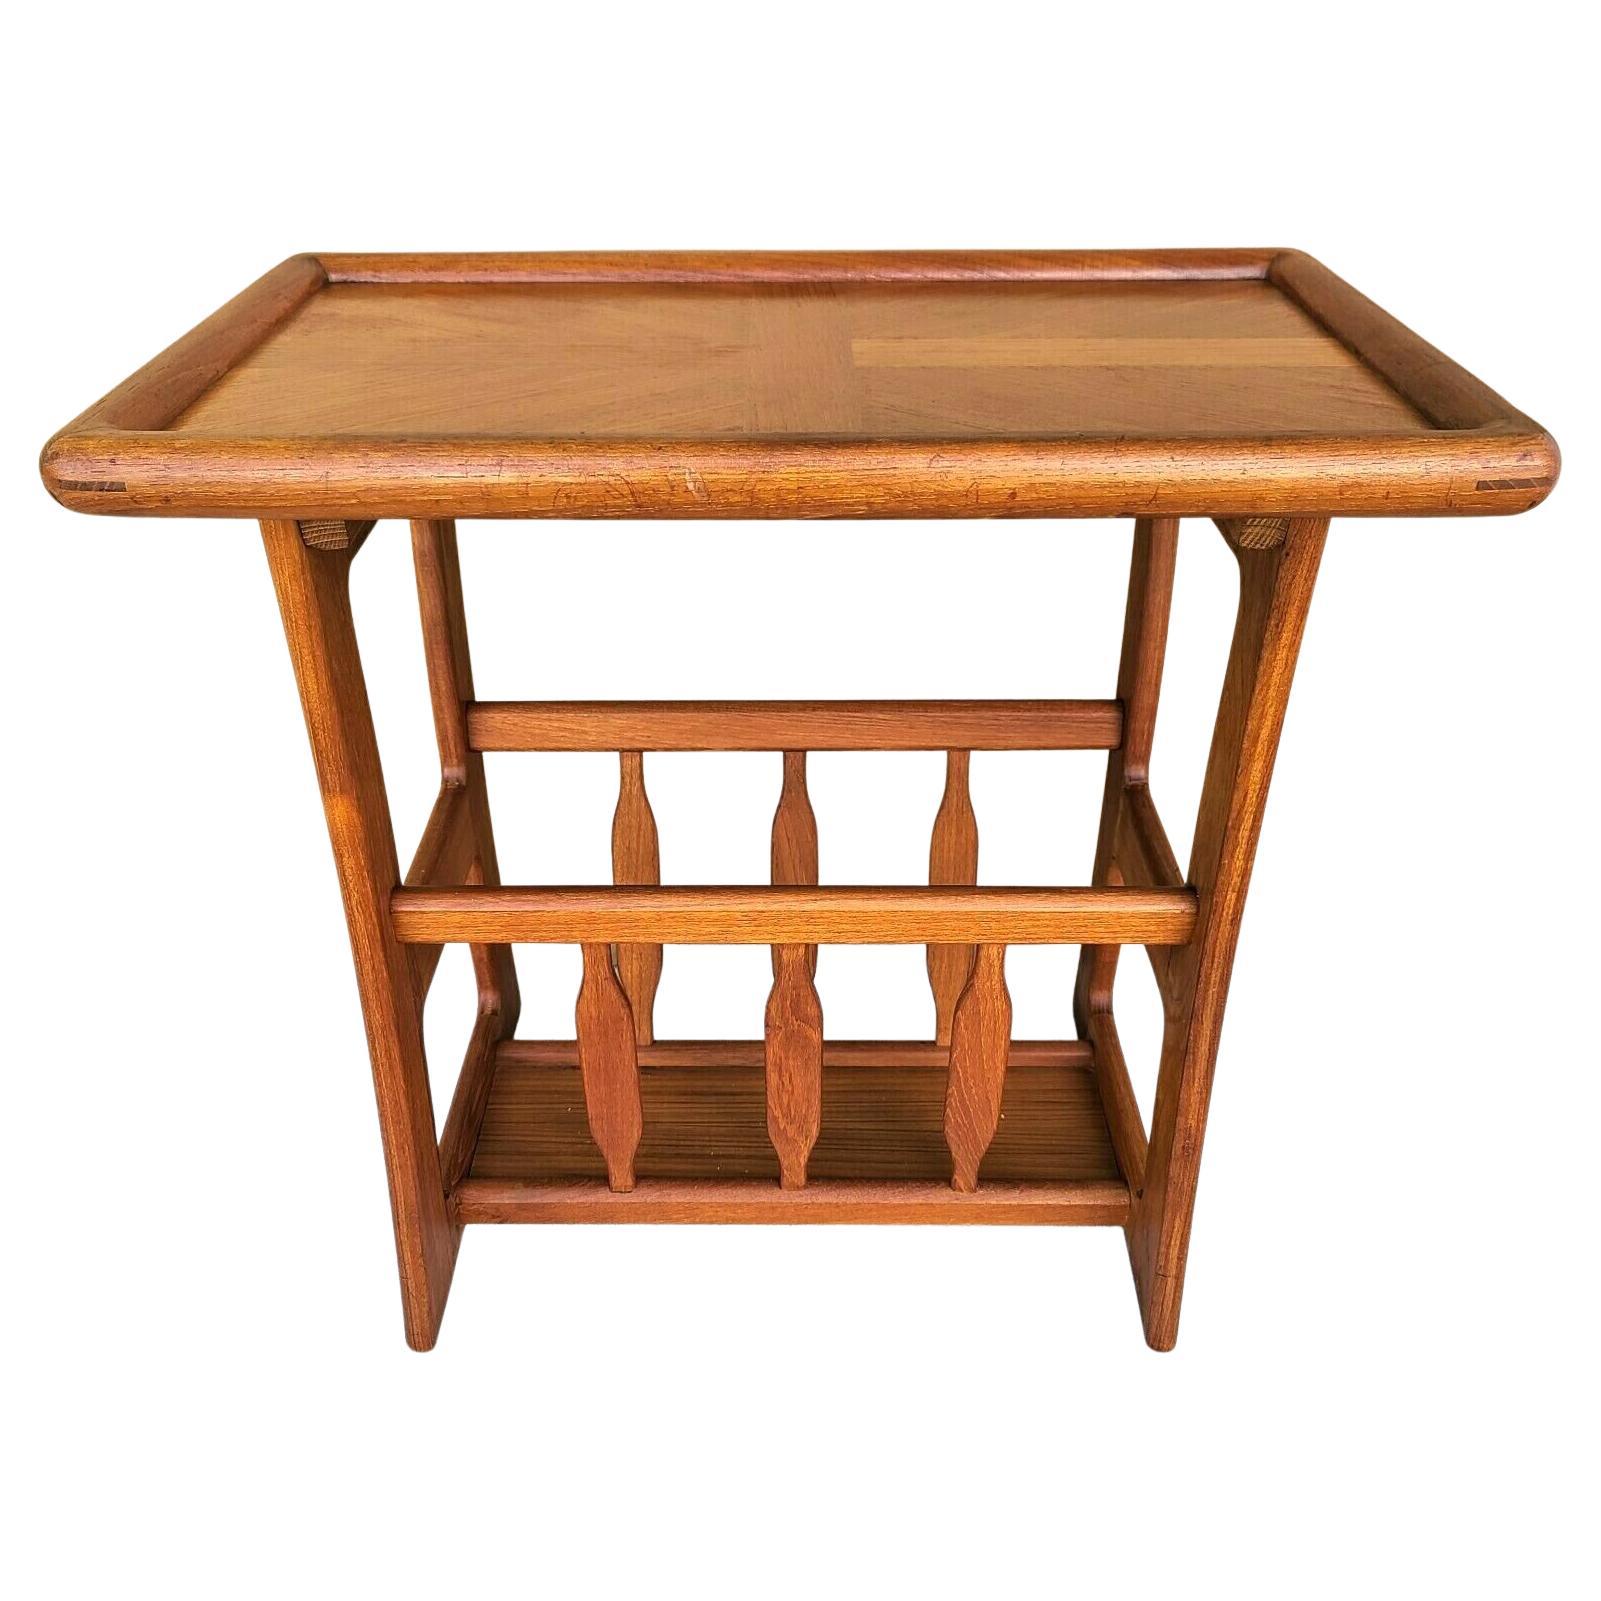 Danish Modern Solid Teak Side Table with Magazine Holder by Goodwood